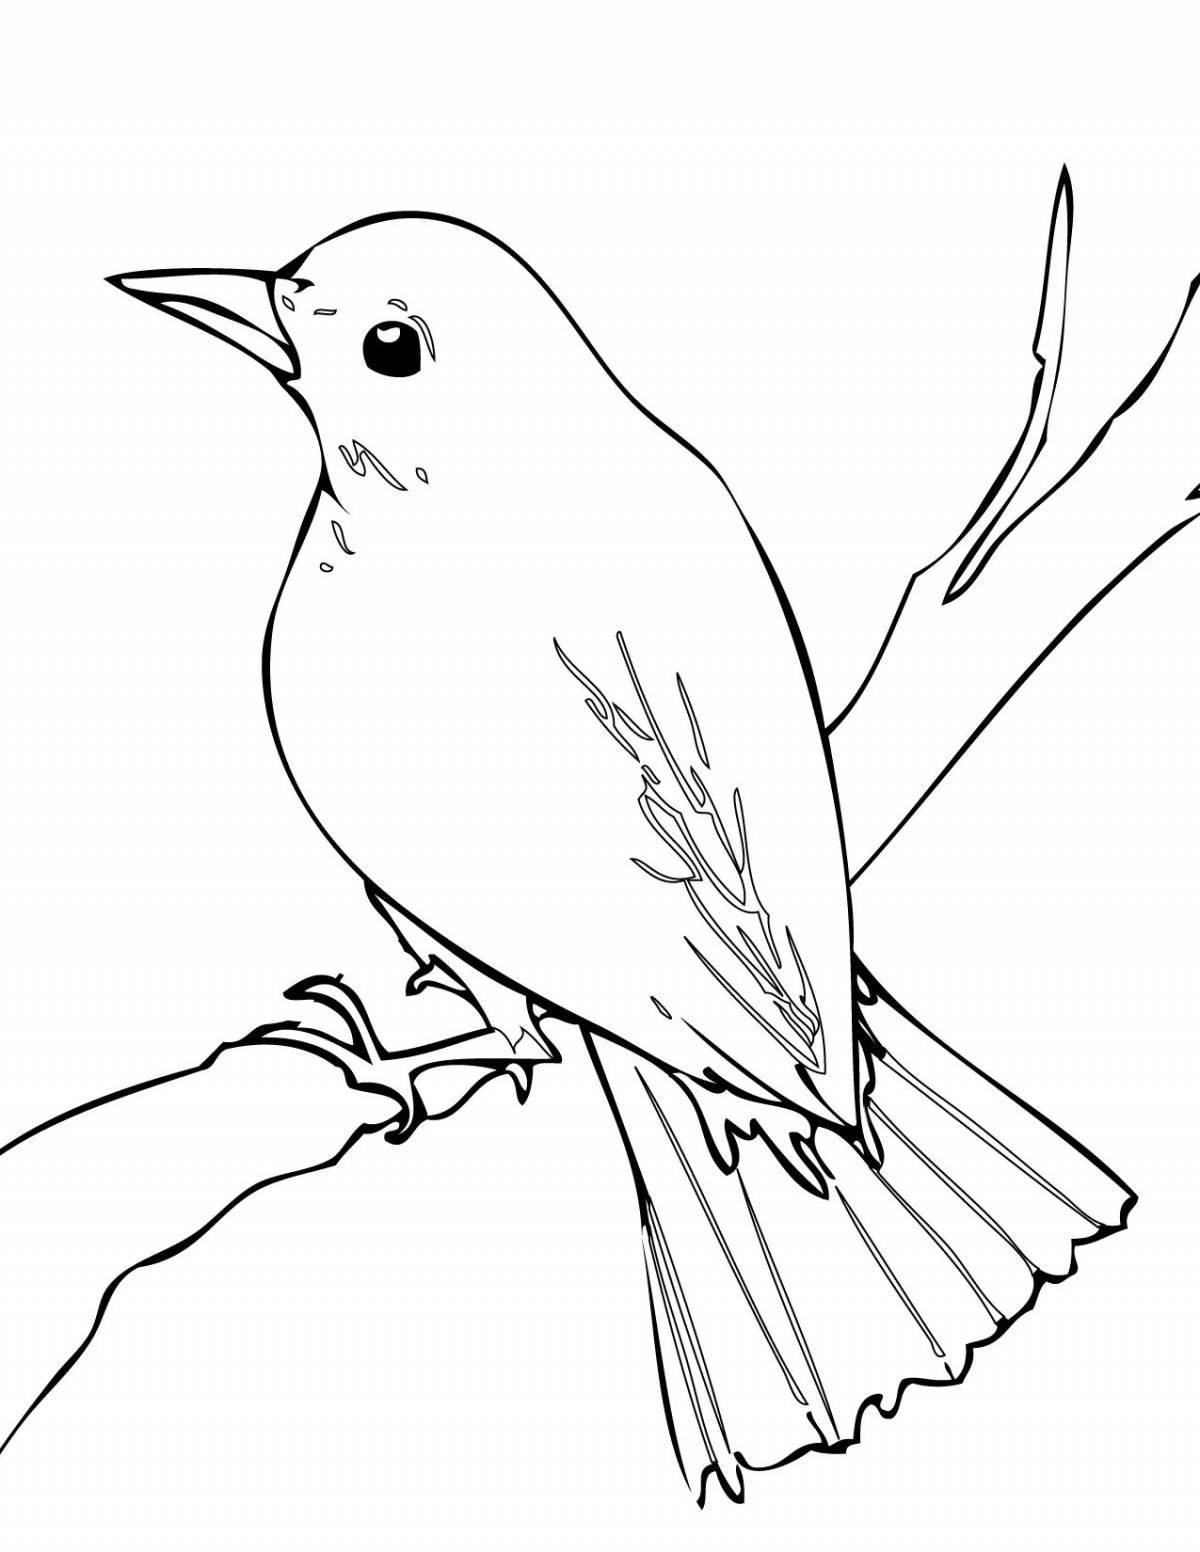 Playful nightingale coloring book for kids